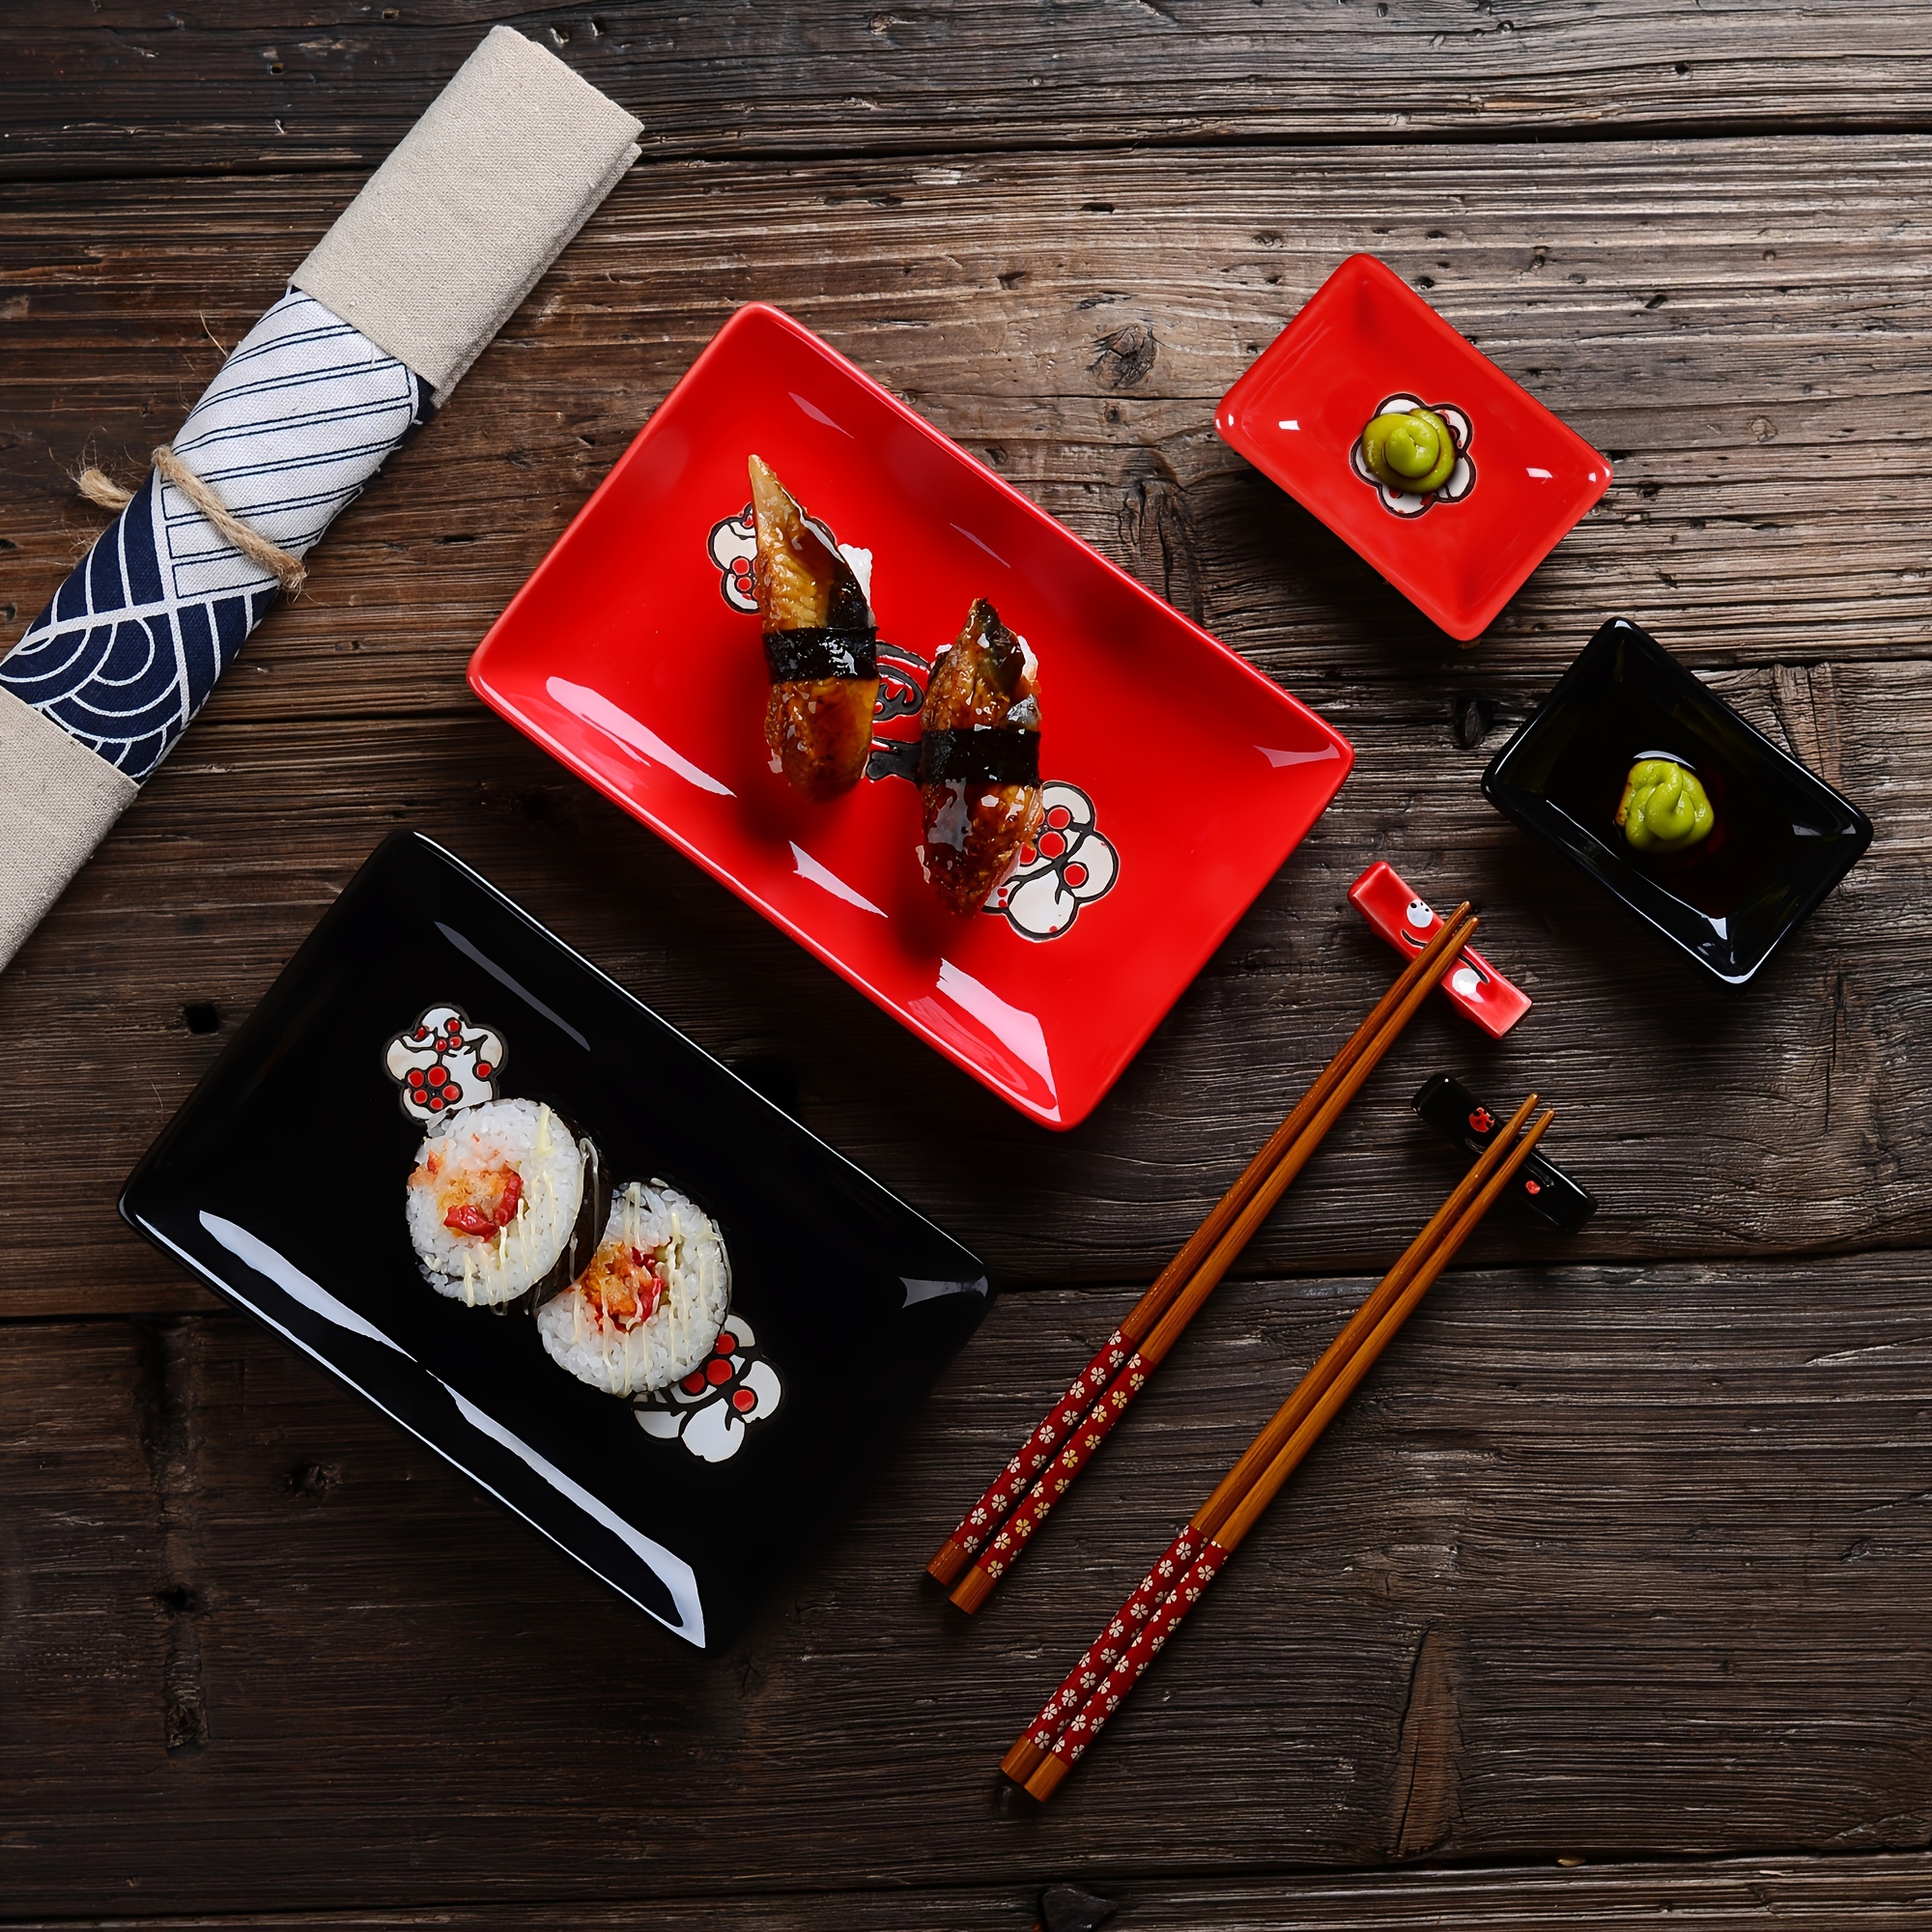 8pcs, Porcelain Sushi Sets Japanese Style - 2 X Sushi Plates, 2 X Dip  Bowls, 2 X Sticks Stands, 2 Pairs Of Bamboo Chopsticks For 2 Person